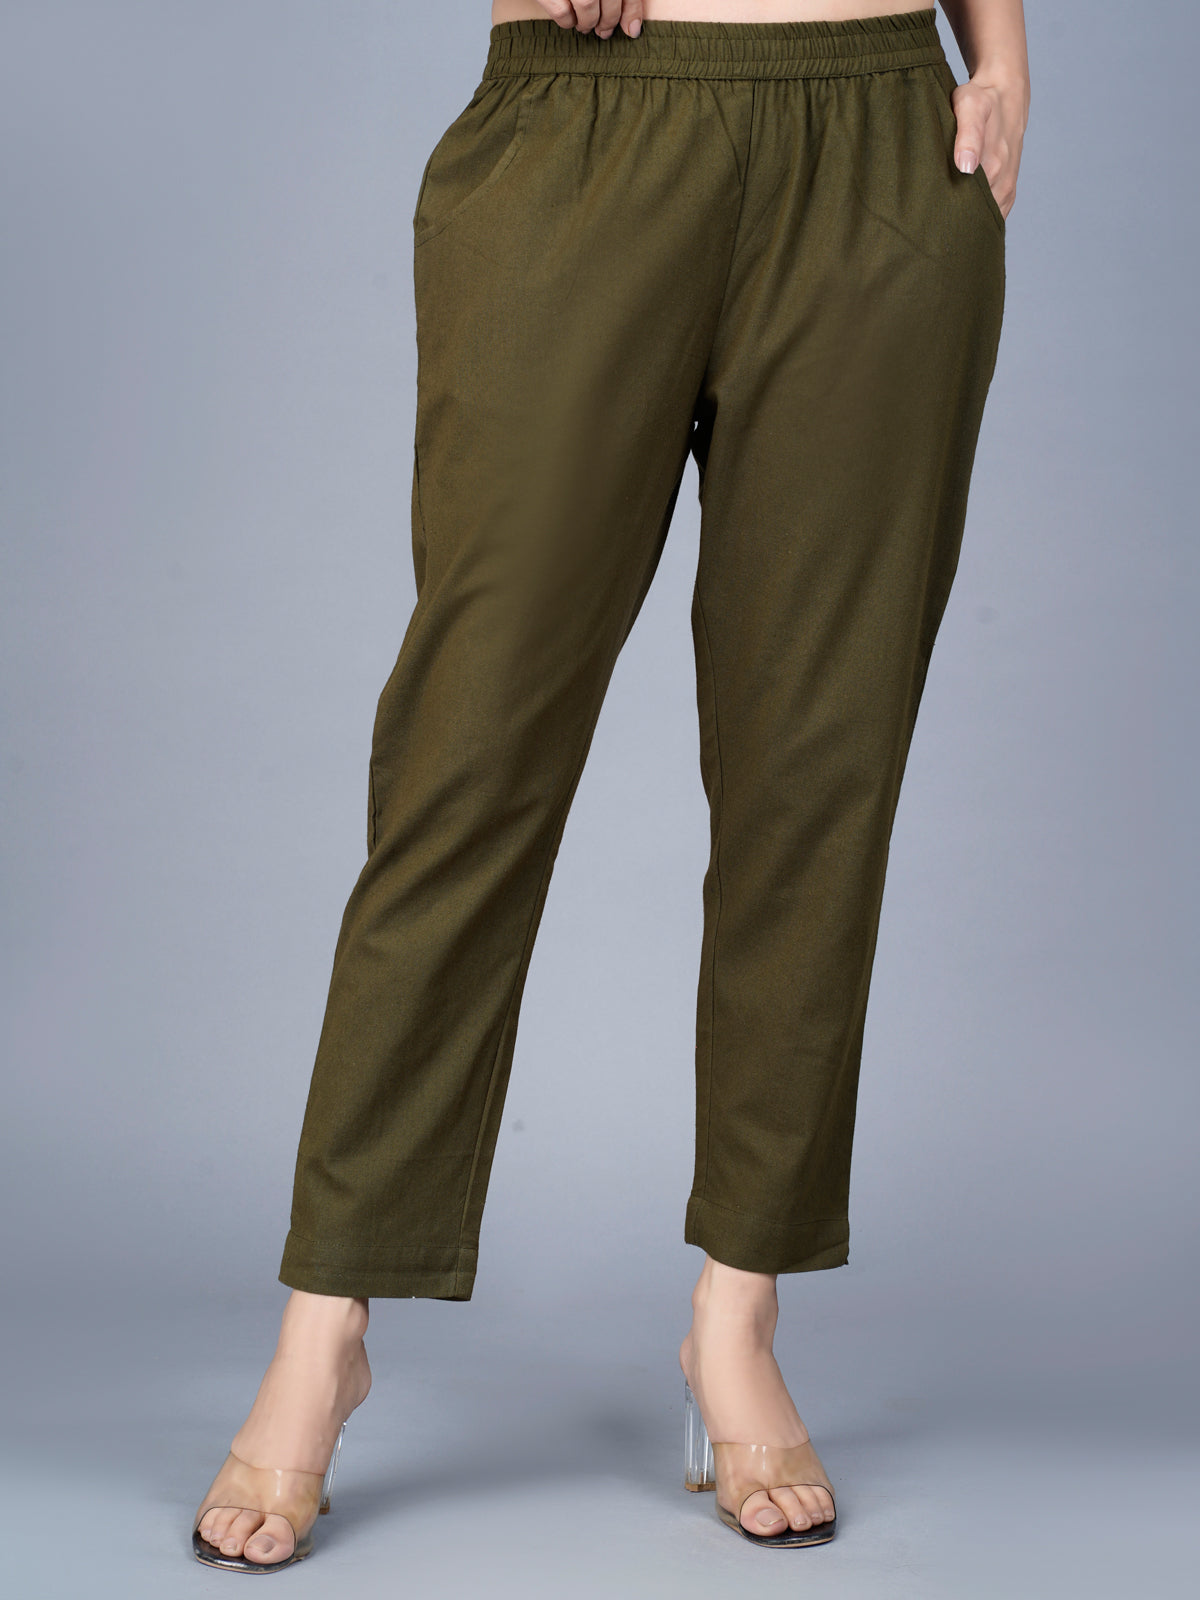 Pack Of 2 Womens Regular Fit Cream And Dark Green Fully Elastic Waistband Cotton Trouser